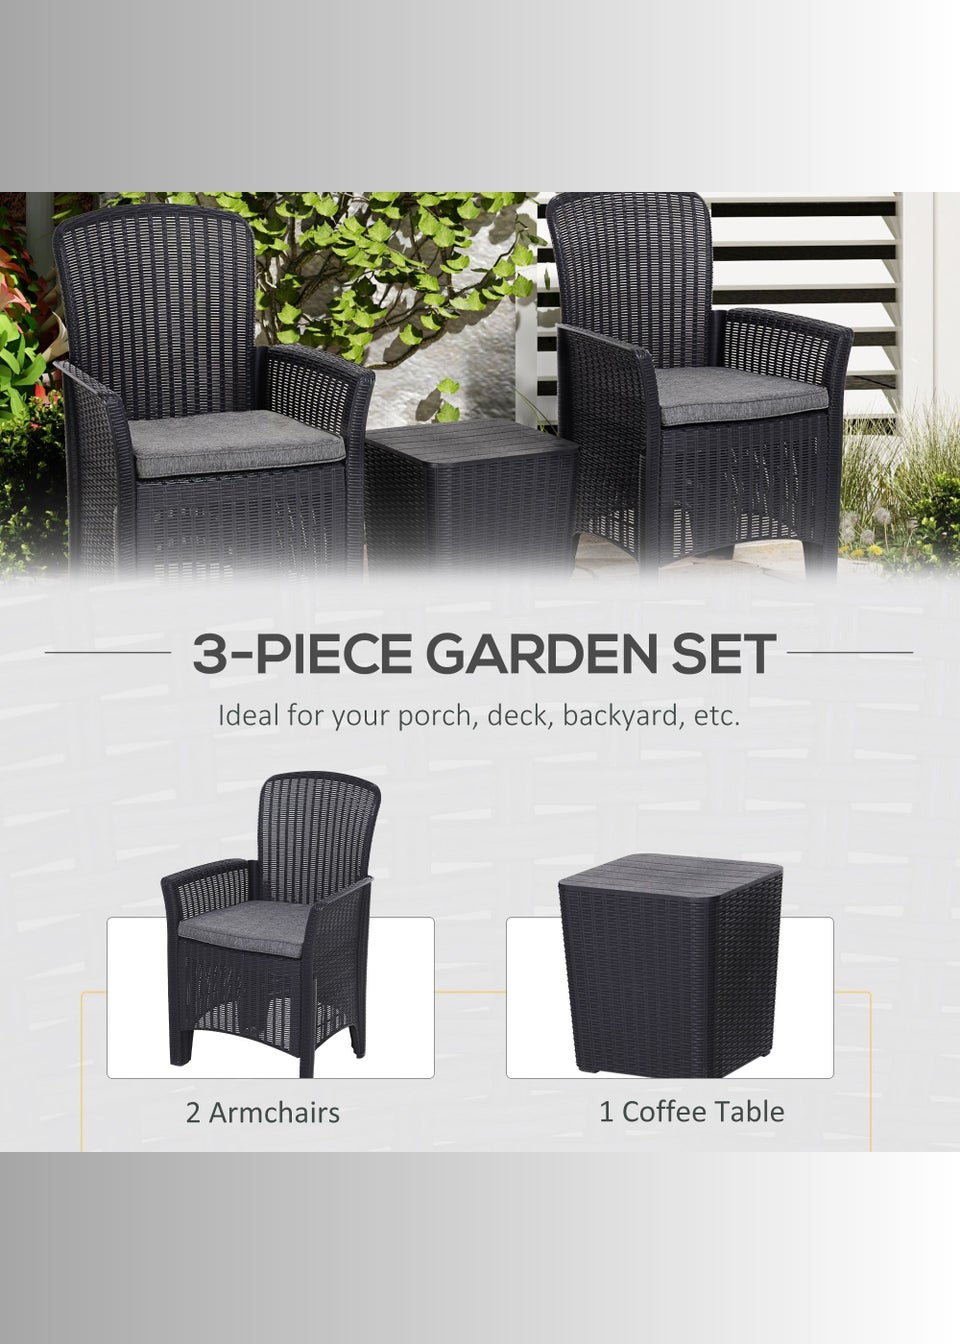 Outsunny 3 Piece Faux Rattan Table & Chairs Set